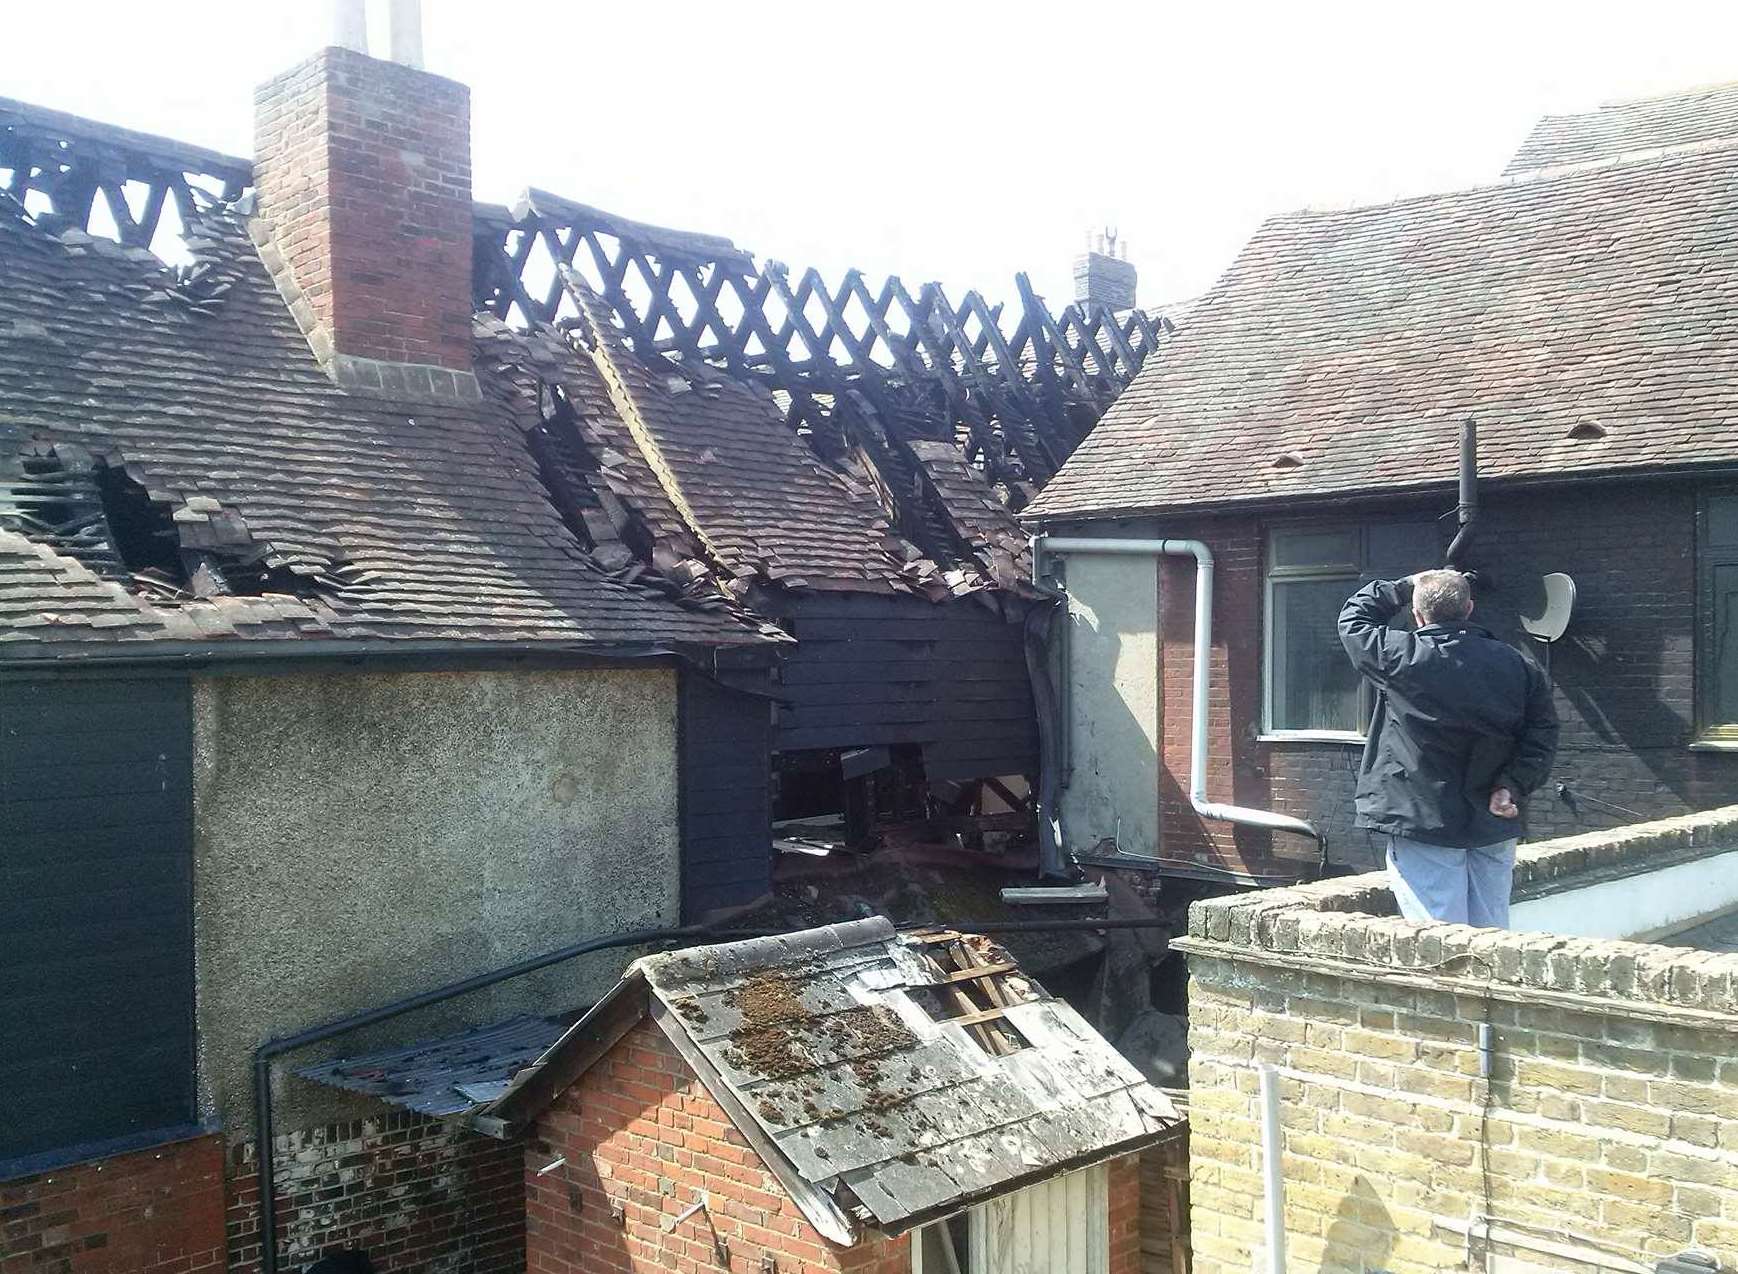 New pictures show the extent of the damage in the roof of one of the buildings affected. Picture: Oliver Sebastien.